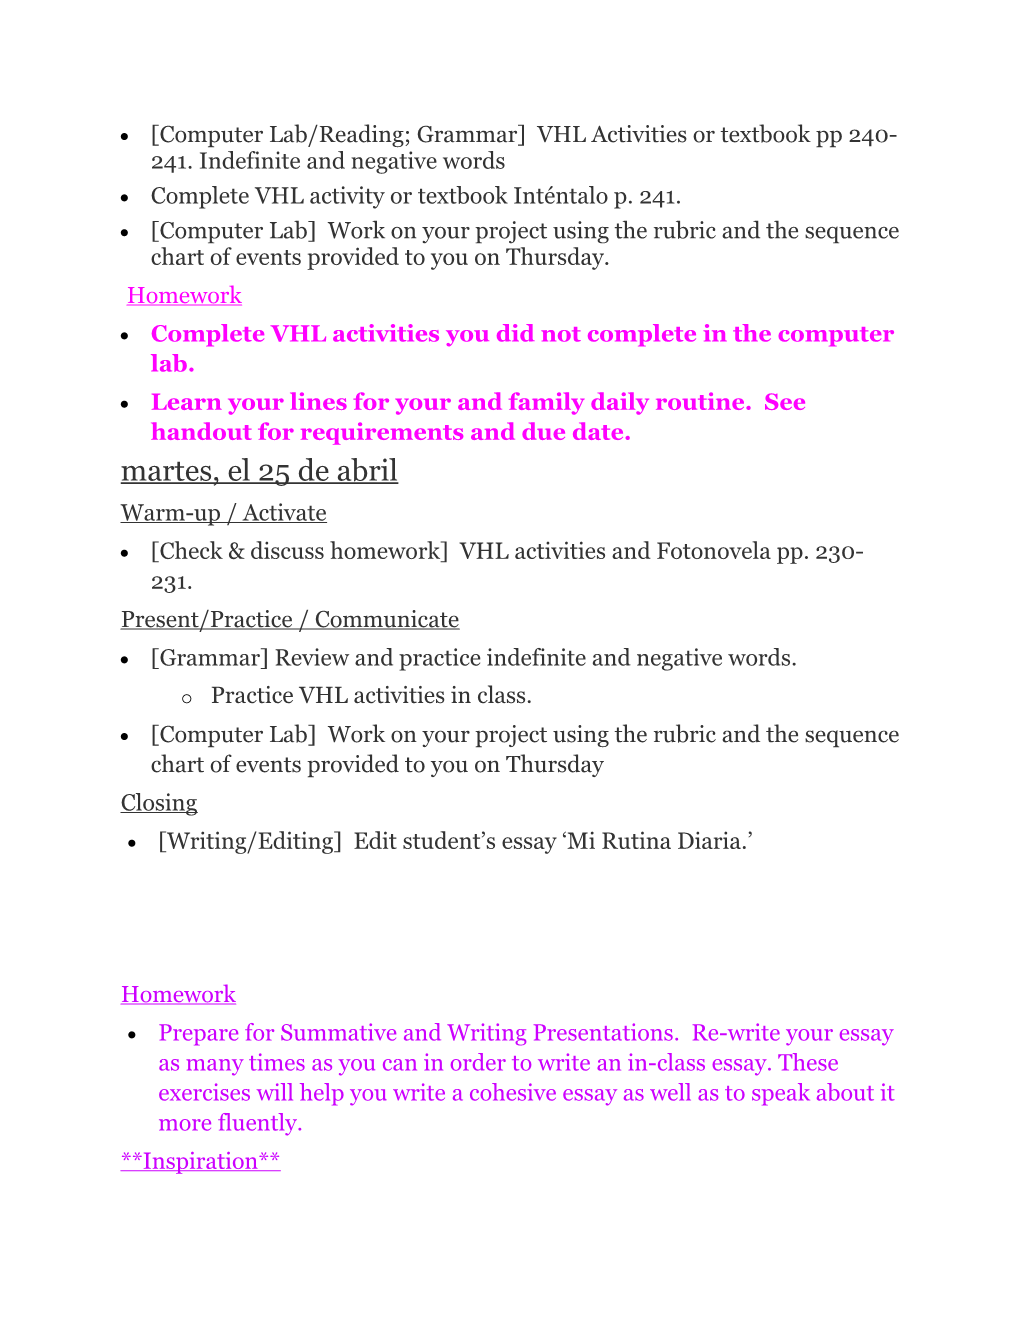 Present the Communicative Goals Forlección7. Go Over the Contents of Each Section